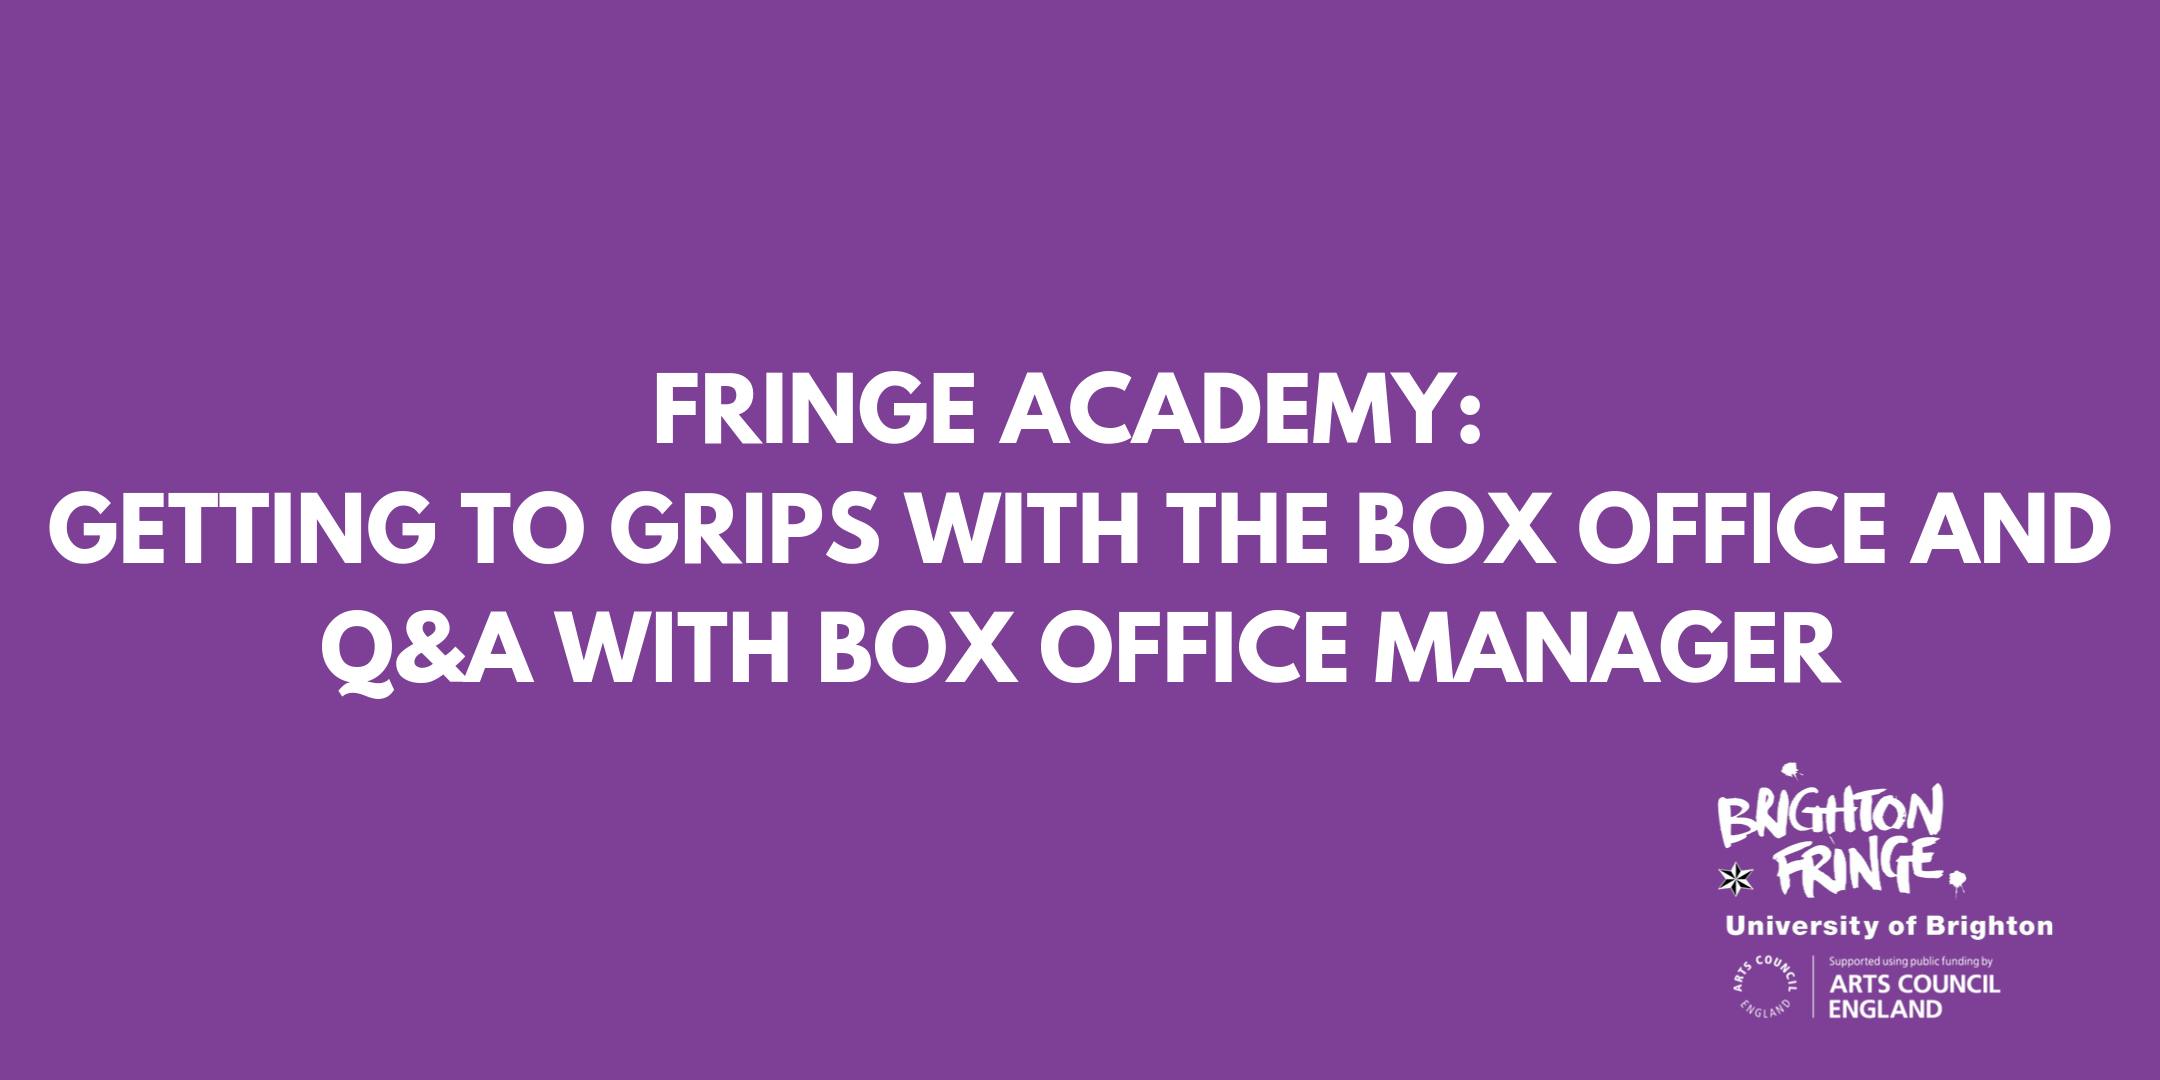 Fringe Academy Getting To Grips With The Box Office At